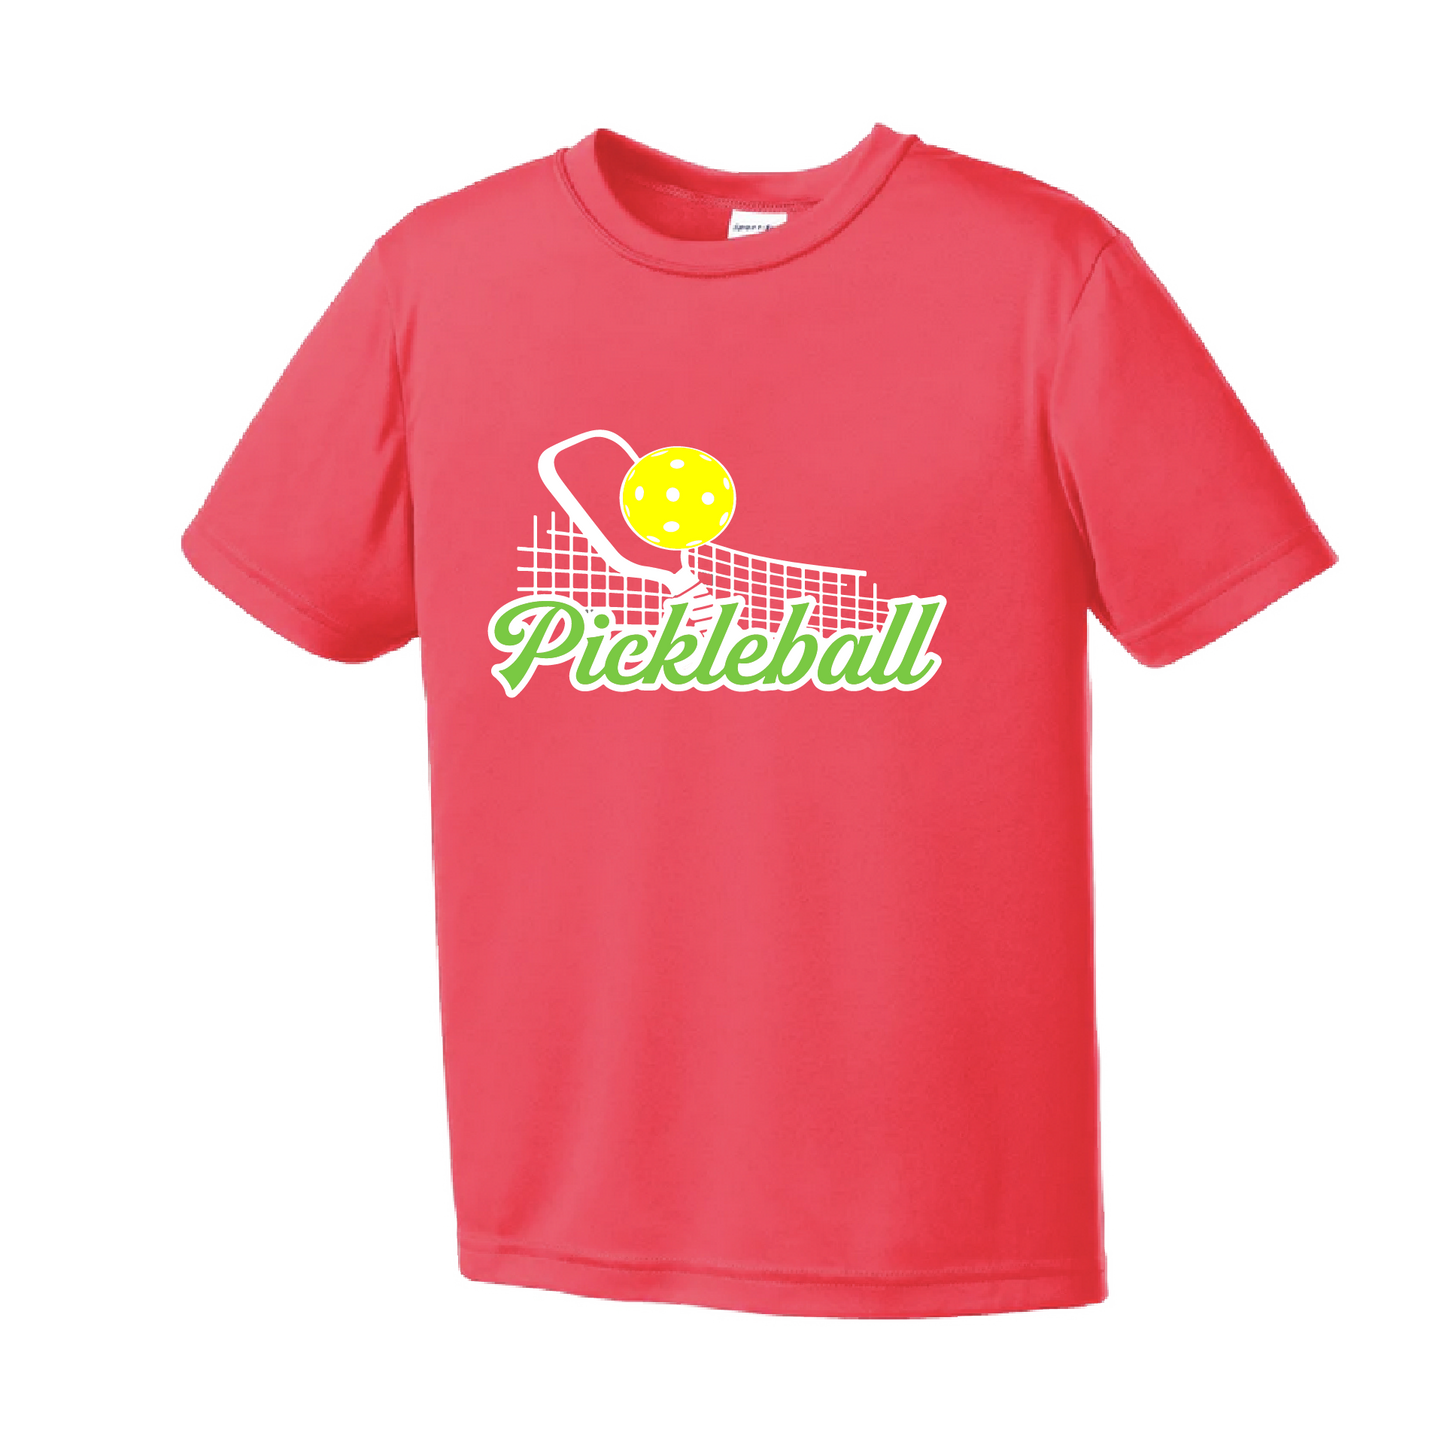 Pickleball Design: Pickleball with Net  Youth Style: Short Sleeve  Shirts are lightweight, roomy and highly breathable. These moisture-wicking shirts are designed for athletic performance. They feature PosiCharge technology to lock in color and prevent logos from fading. Removable tag and set-in sleeves for comfort.